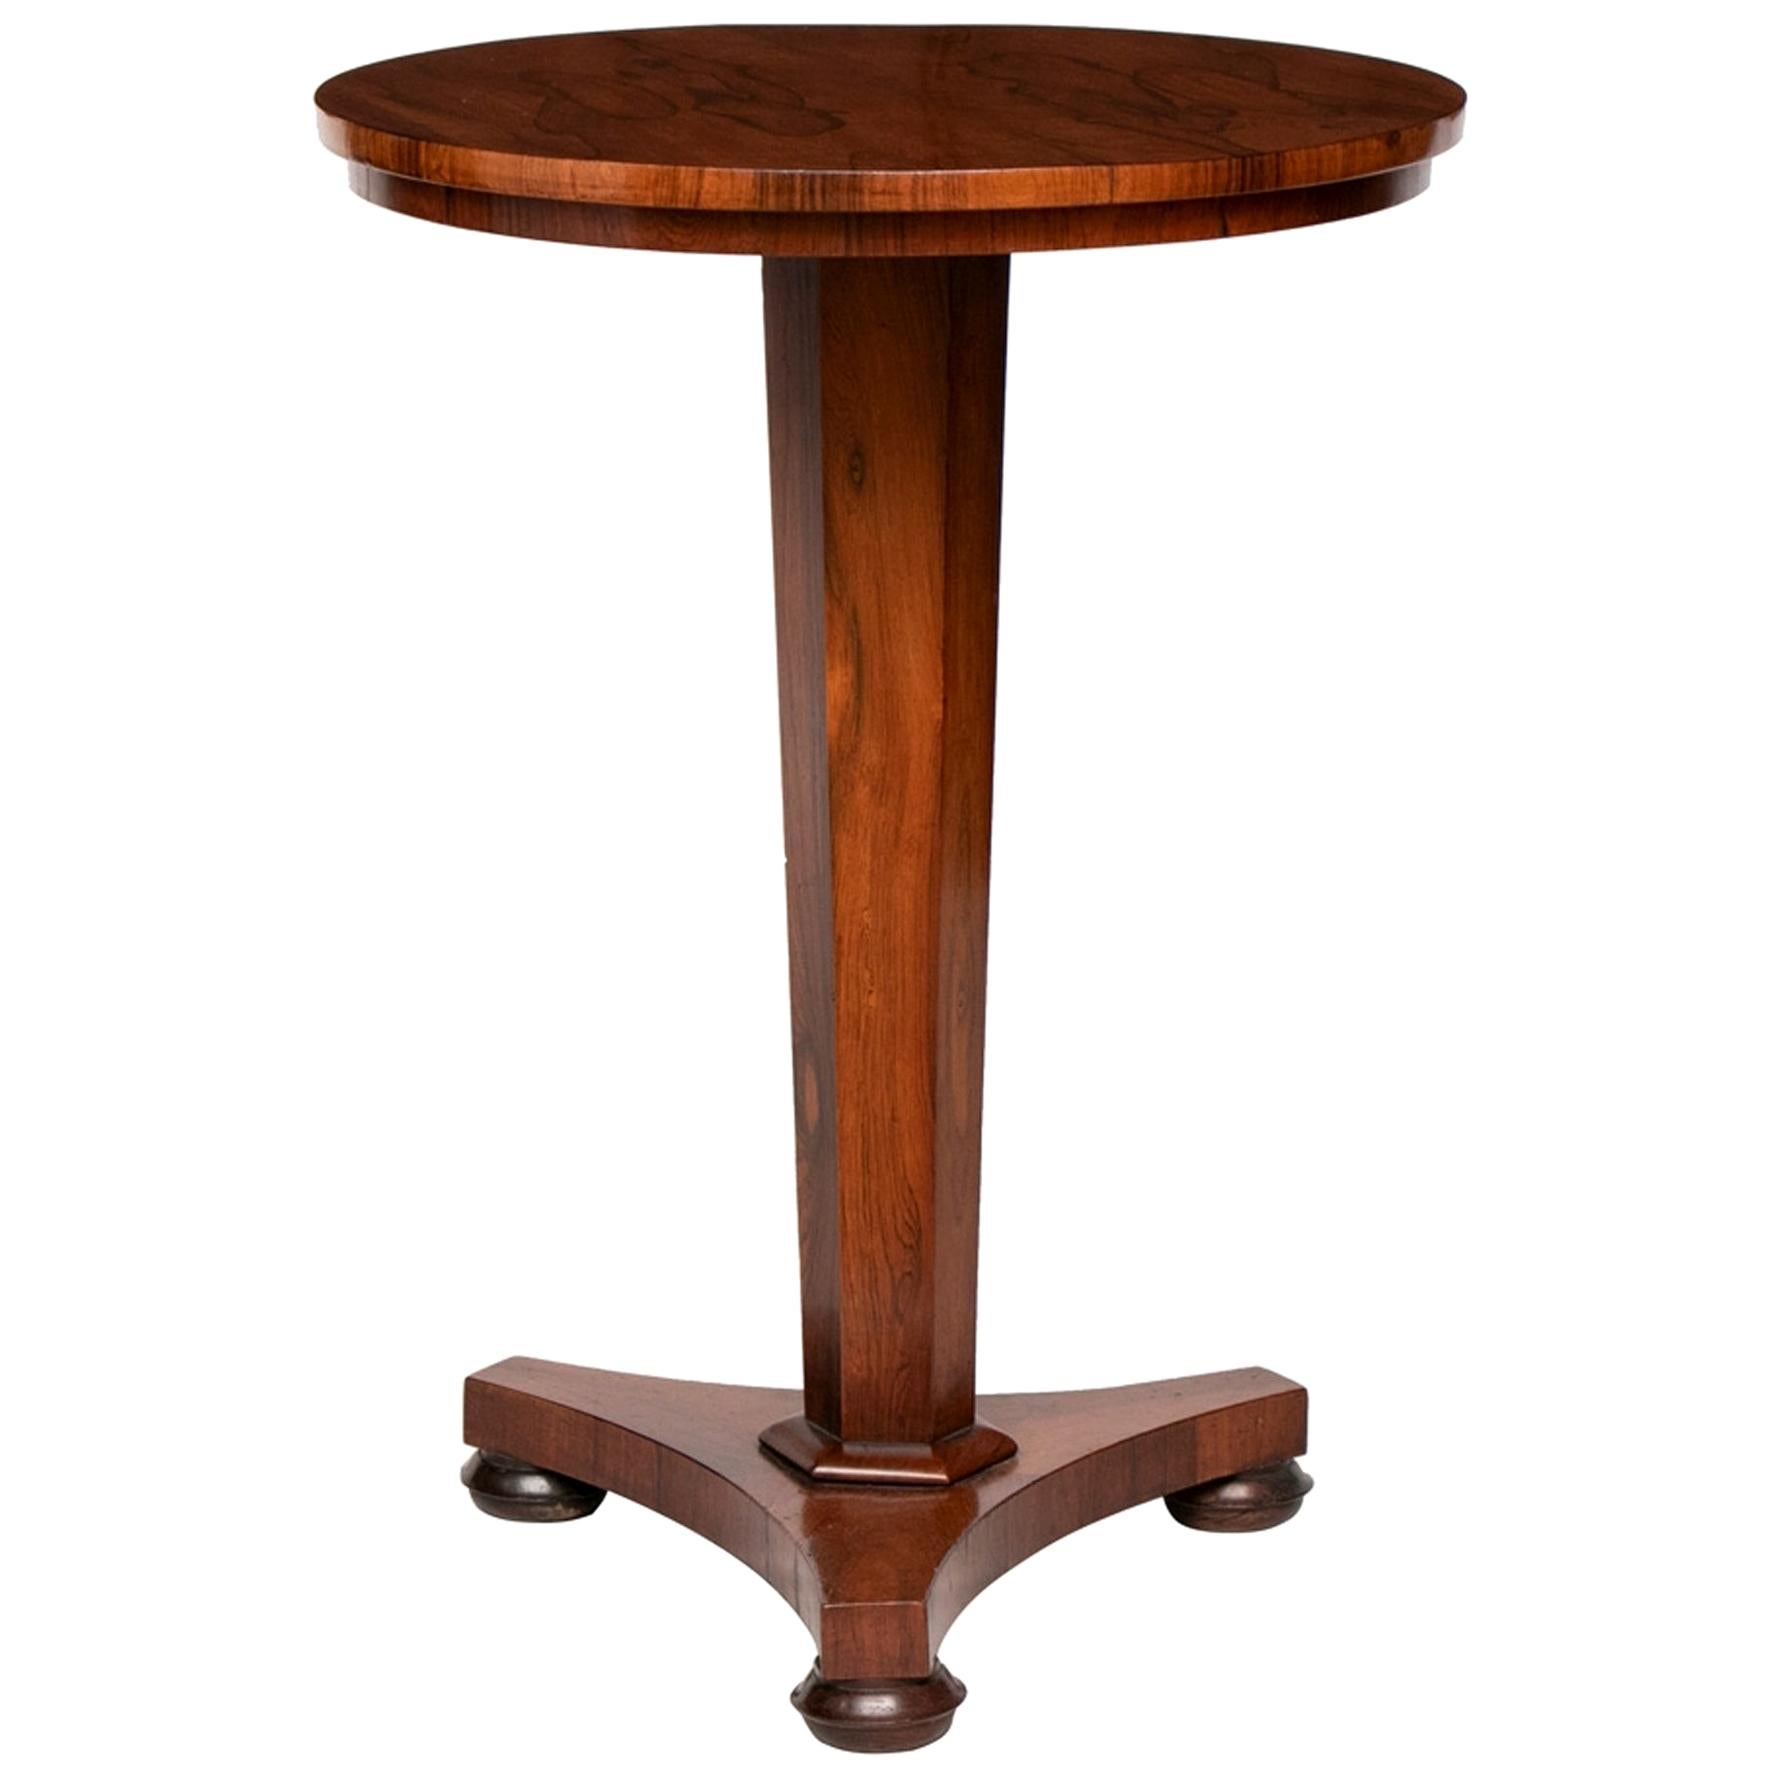 Victorian Rosewood Side Table or Lamp Table, circa 1860